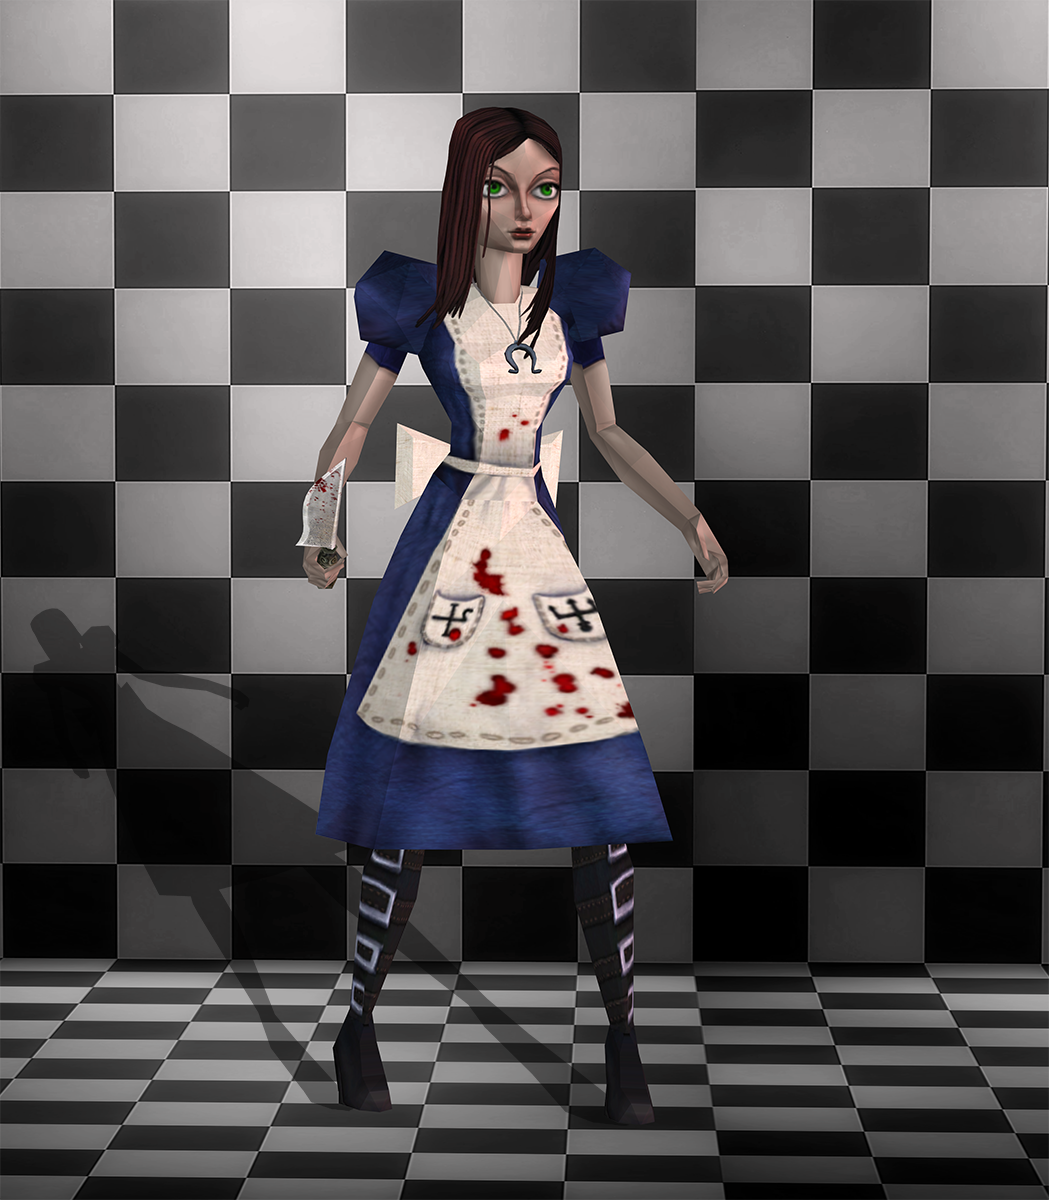 Alice Madness Returns 2 by tombraider4ever on DeviantArt